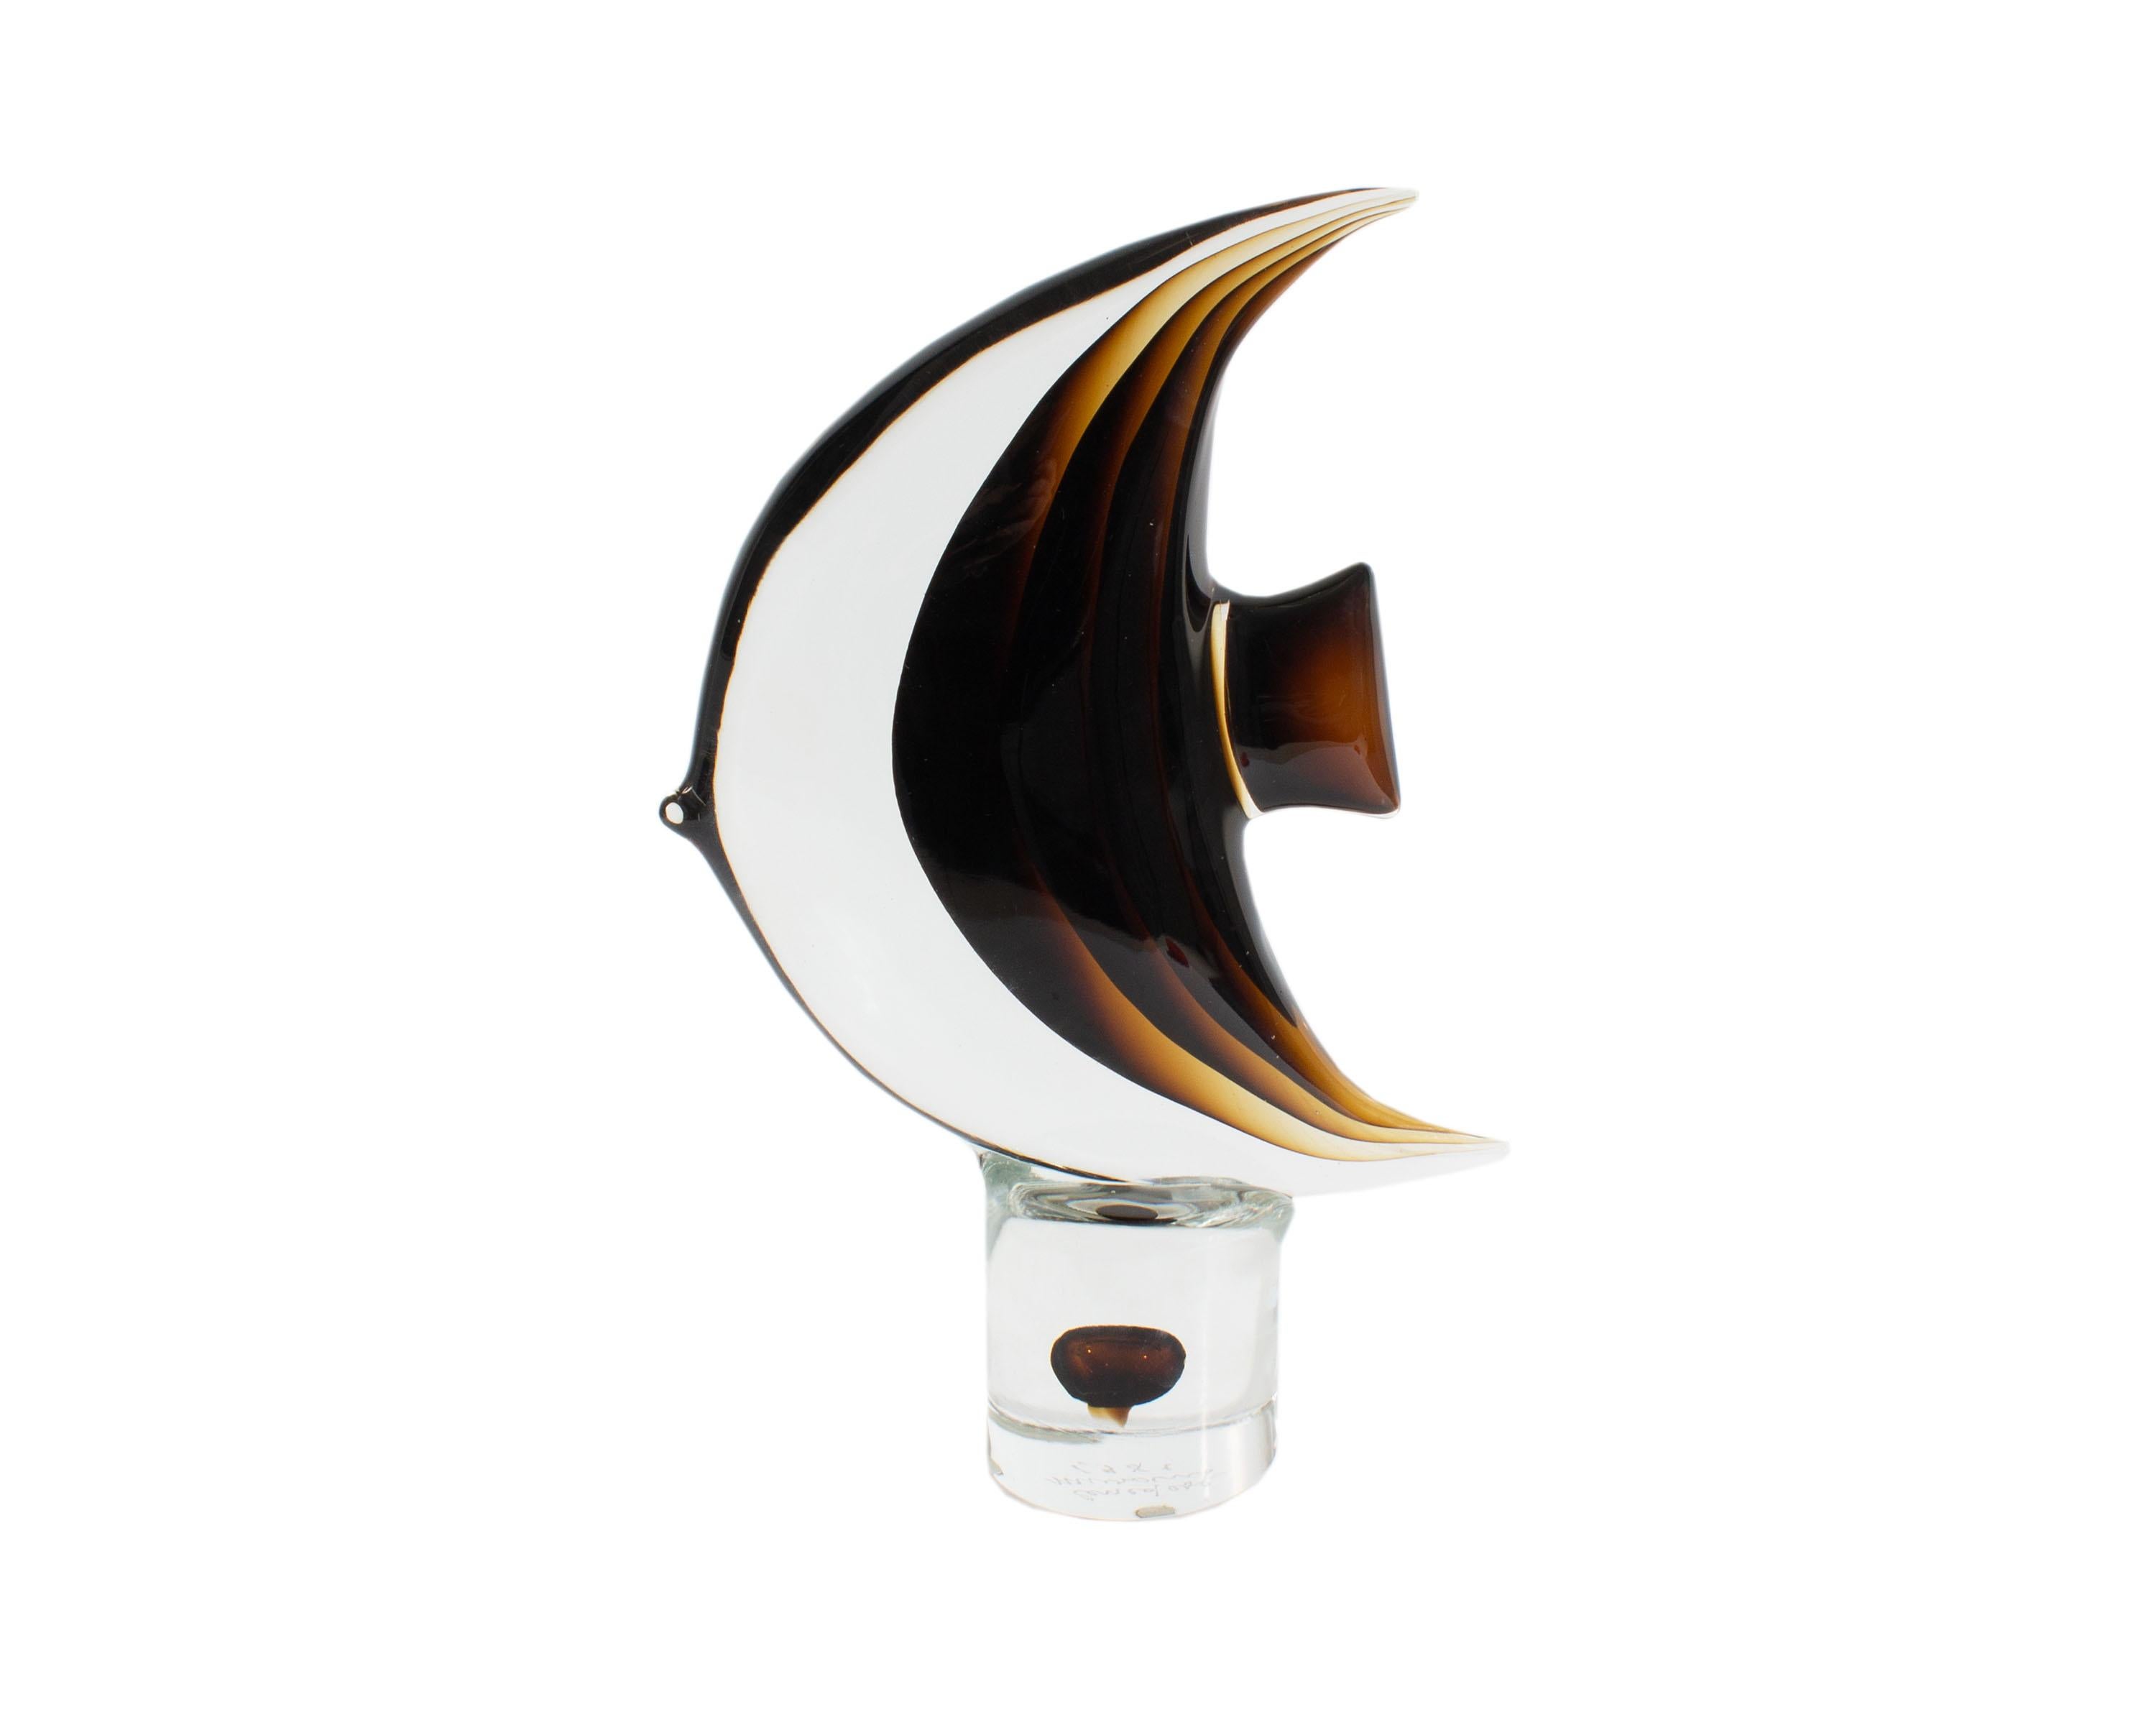 A 1981 art glass fish sculpture by Cenedese Murano. Made in Italy, the abstract sculpture resembles a tropical fish upon a cylindrical base. Gradient brown and transparent glass form the body of the fish. A brown orb floats within the center of the